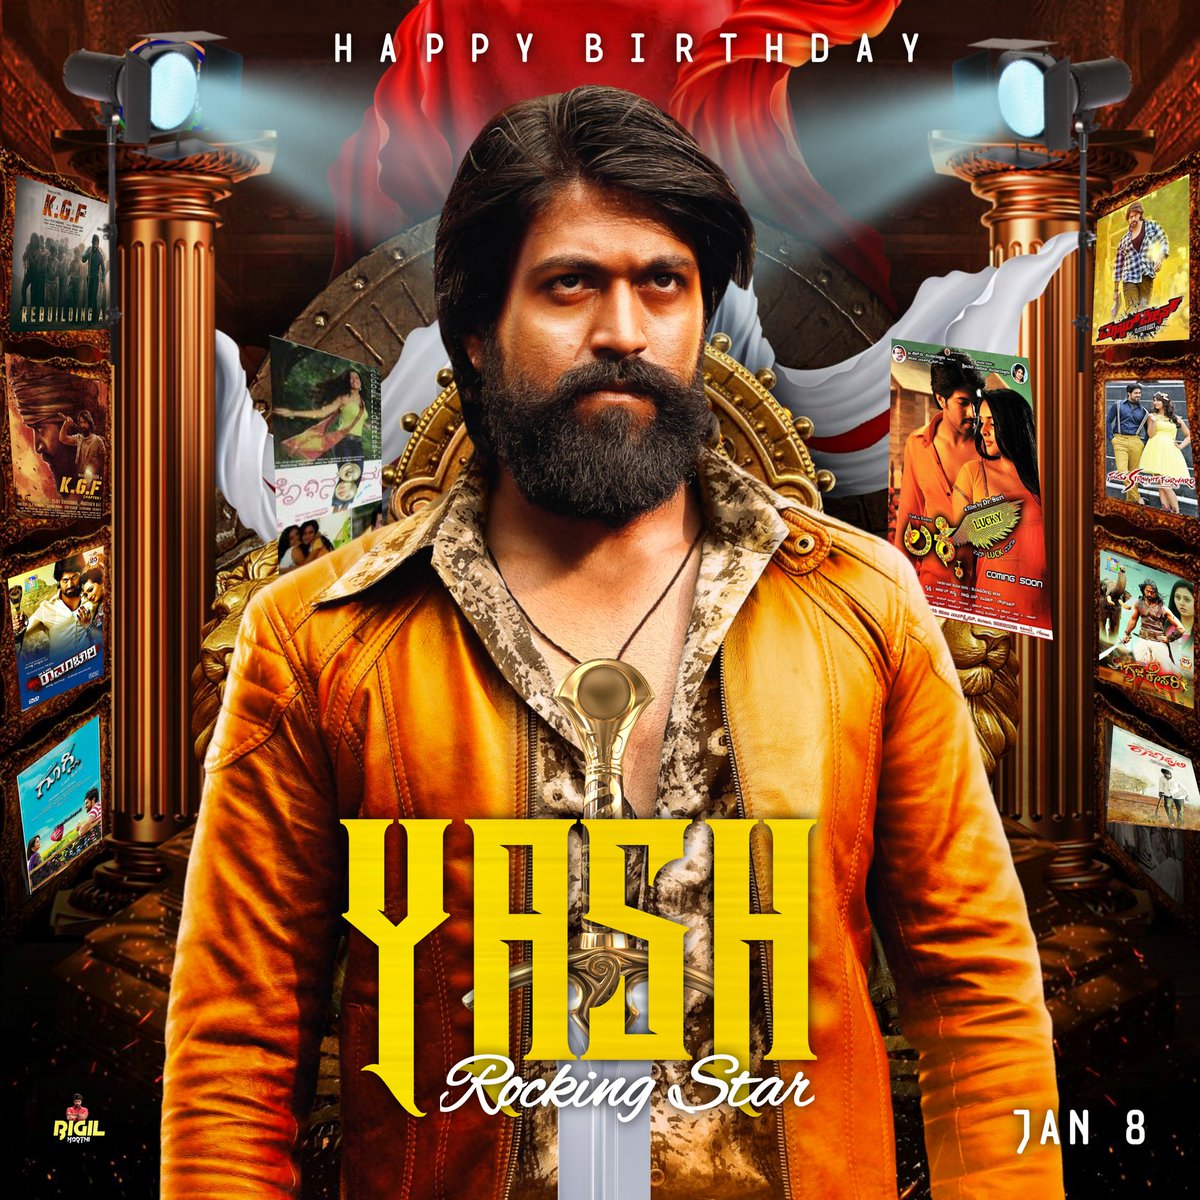 Happy To Release the Special CDP Design for Rocking Star @TheNameIsYash Birthday 🥳🎂💖

Designed By @Itz_KarthiVfc6 💖🔥

Wishes From @actorvijay Fans ❤️

@YashFC @YashTrends
#HBDRockyBhai
#Master #TeamThalapathyBloods